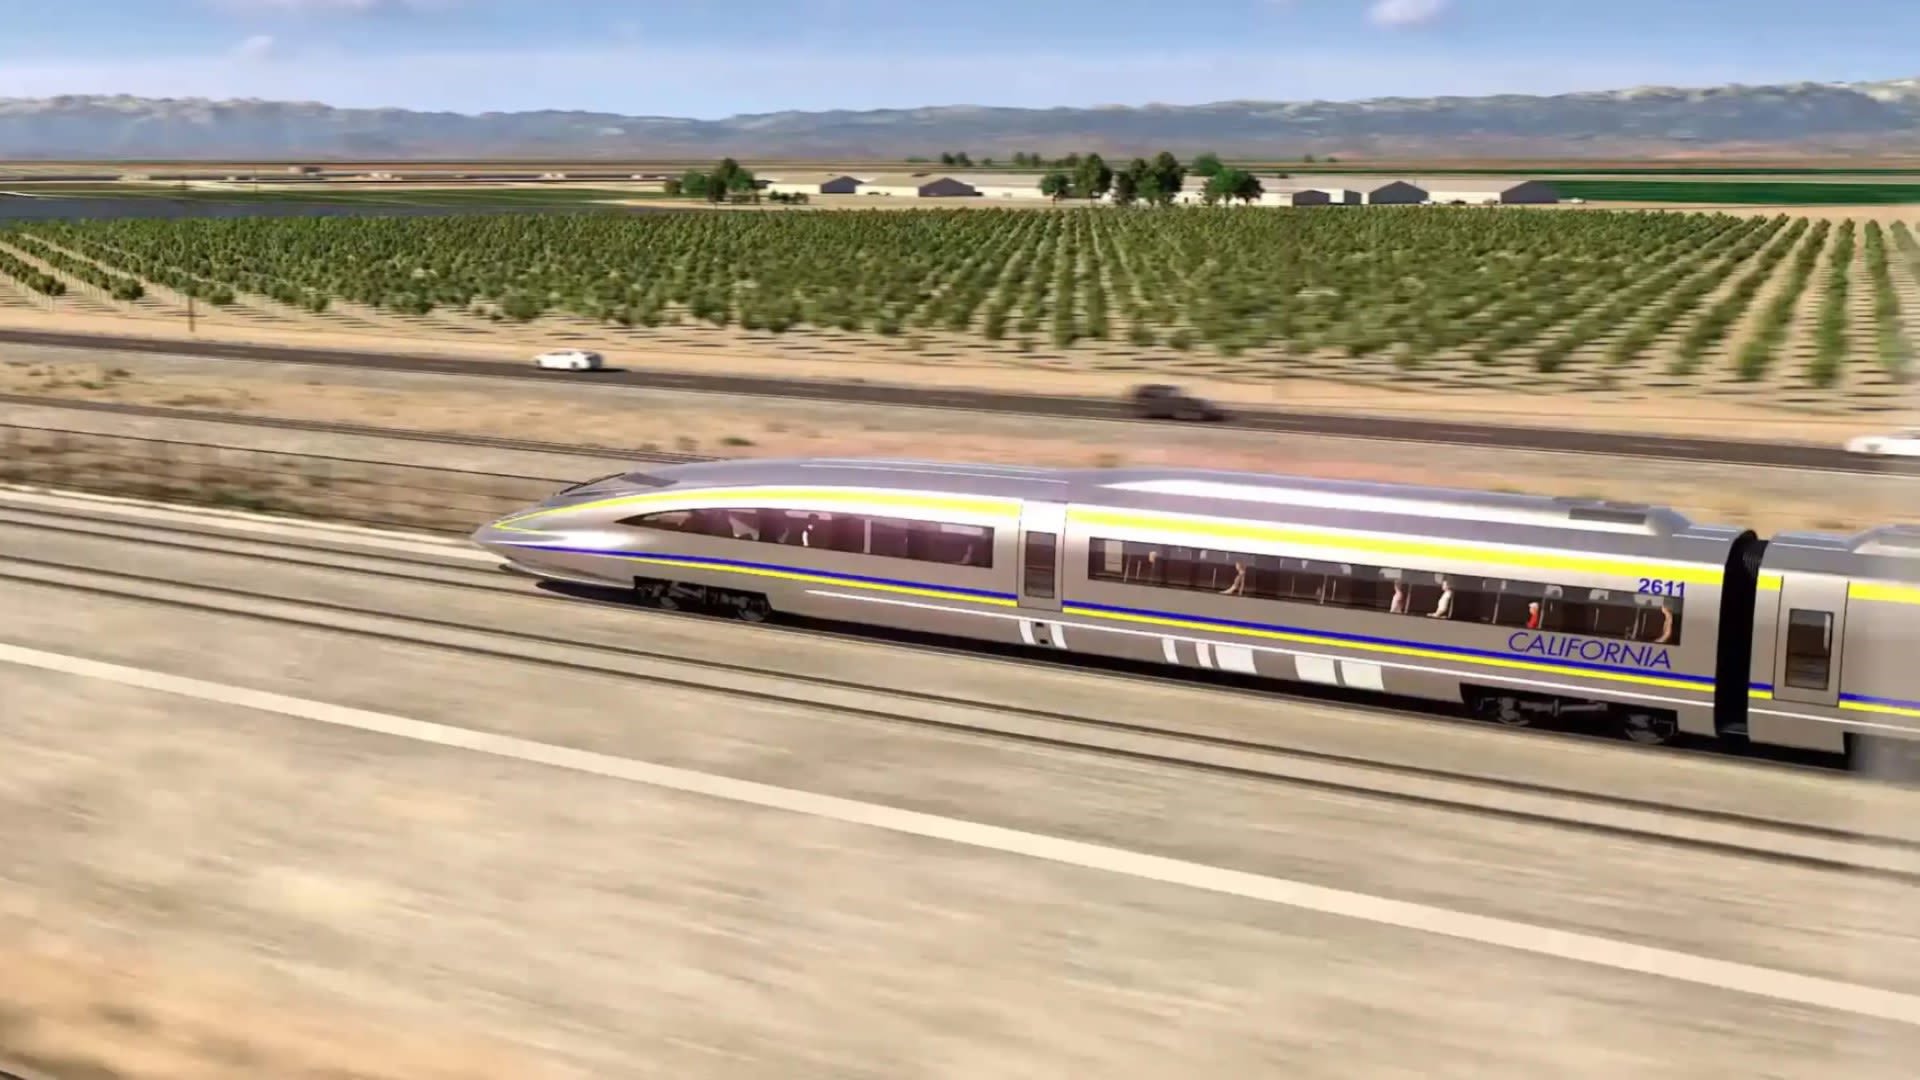 High-speed rail project linking two major U.S. cities takes step forward: 'A historic milestone'